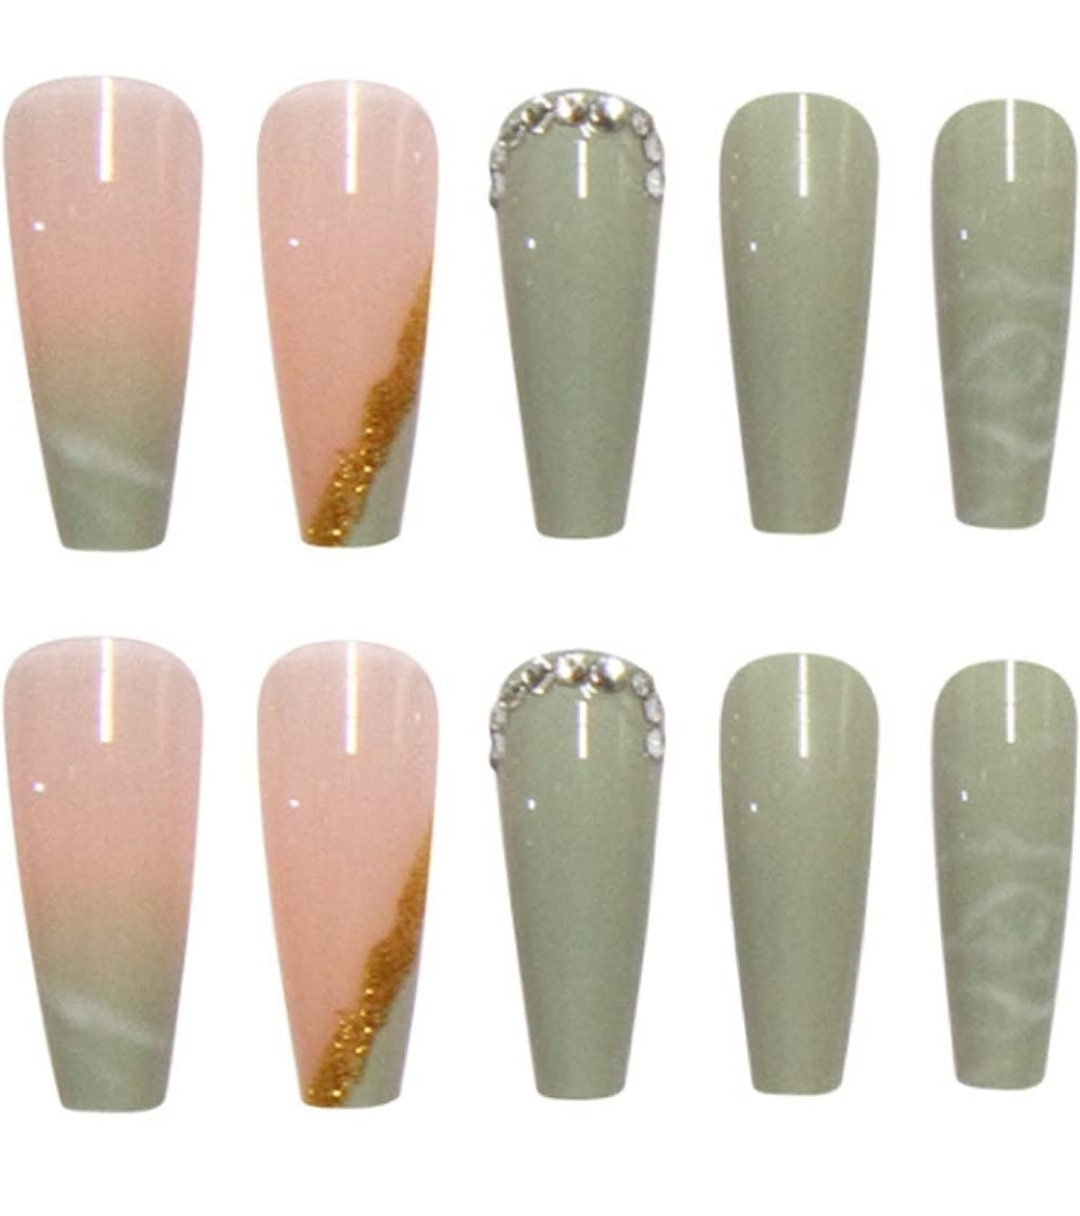 24 Green Jade Extra Long Coffin Best Press on nails glue on kit Nude gold sage marble